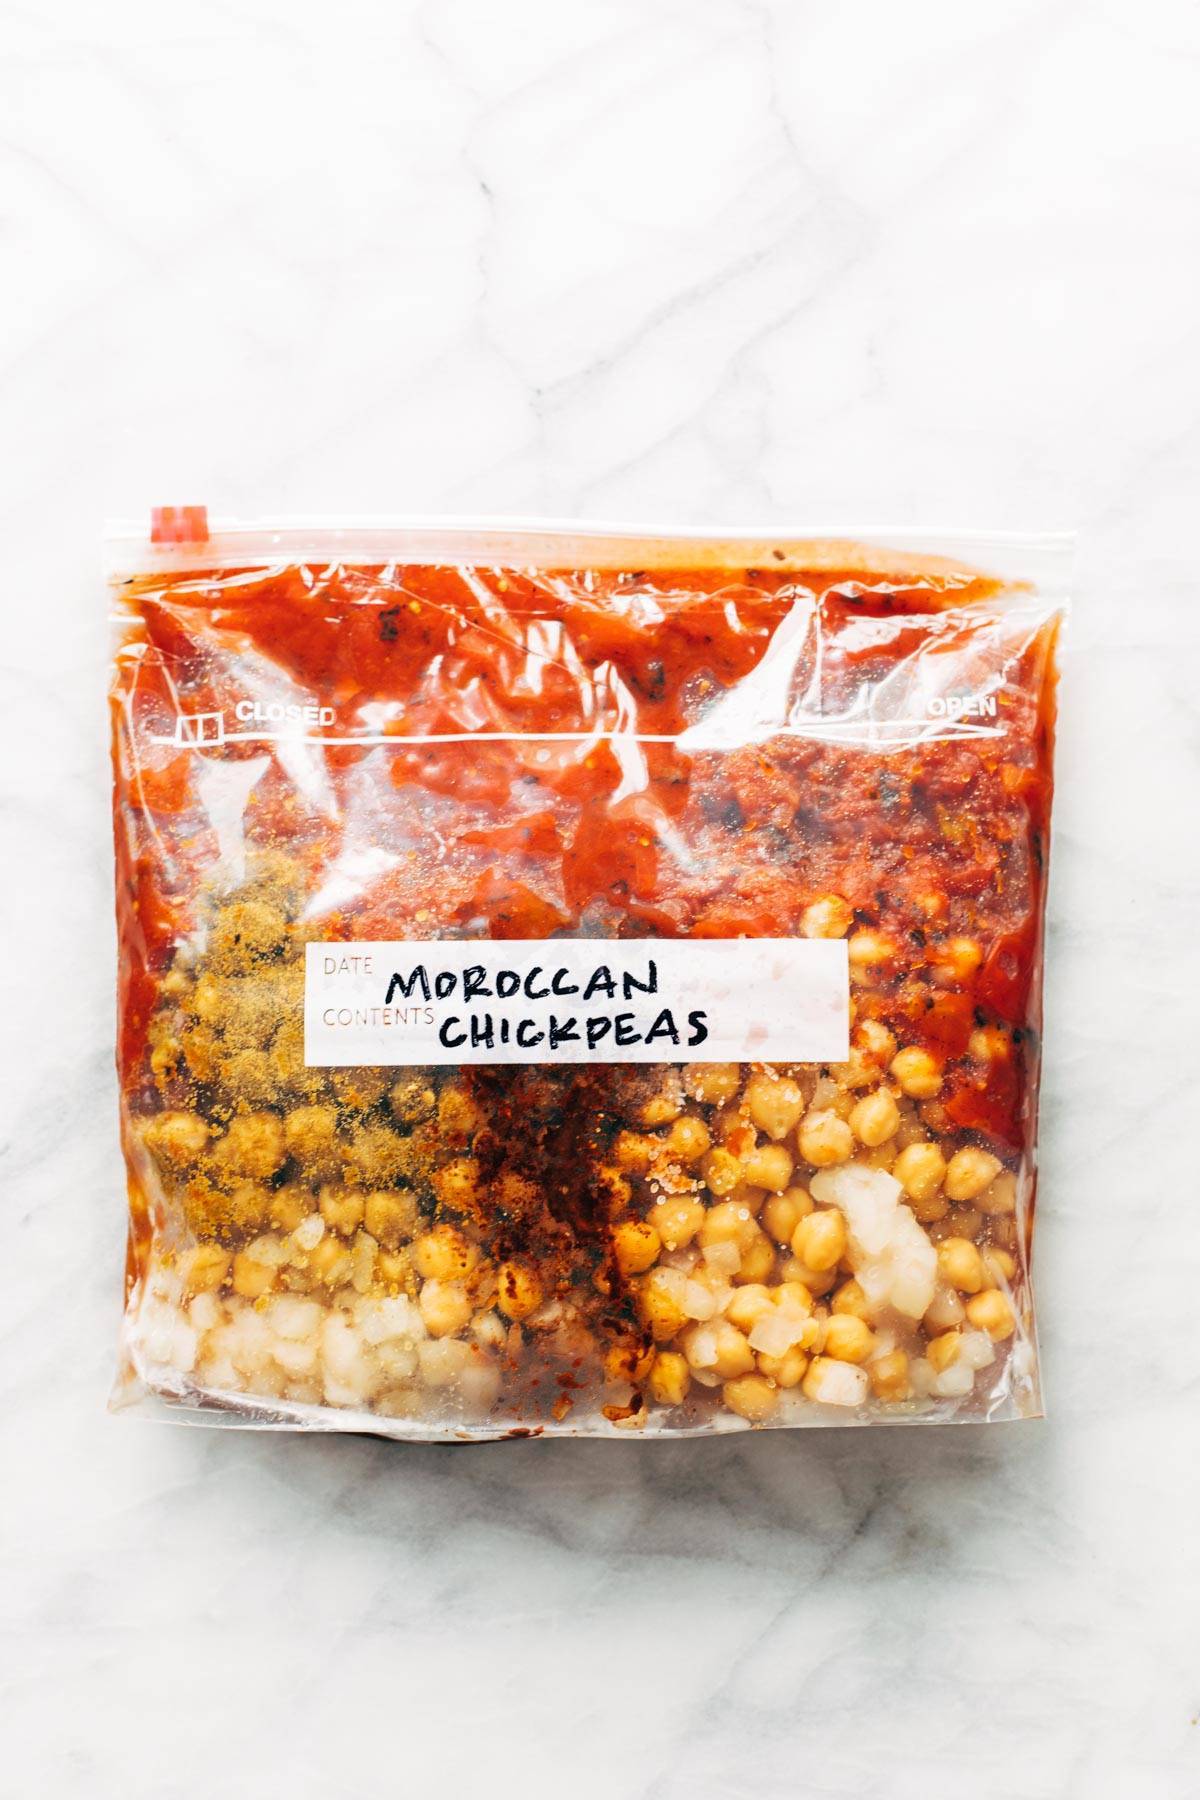 A clear bag with food and a label reading "Moroccan Chickpeas"